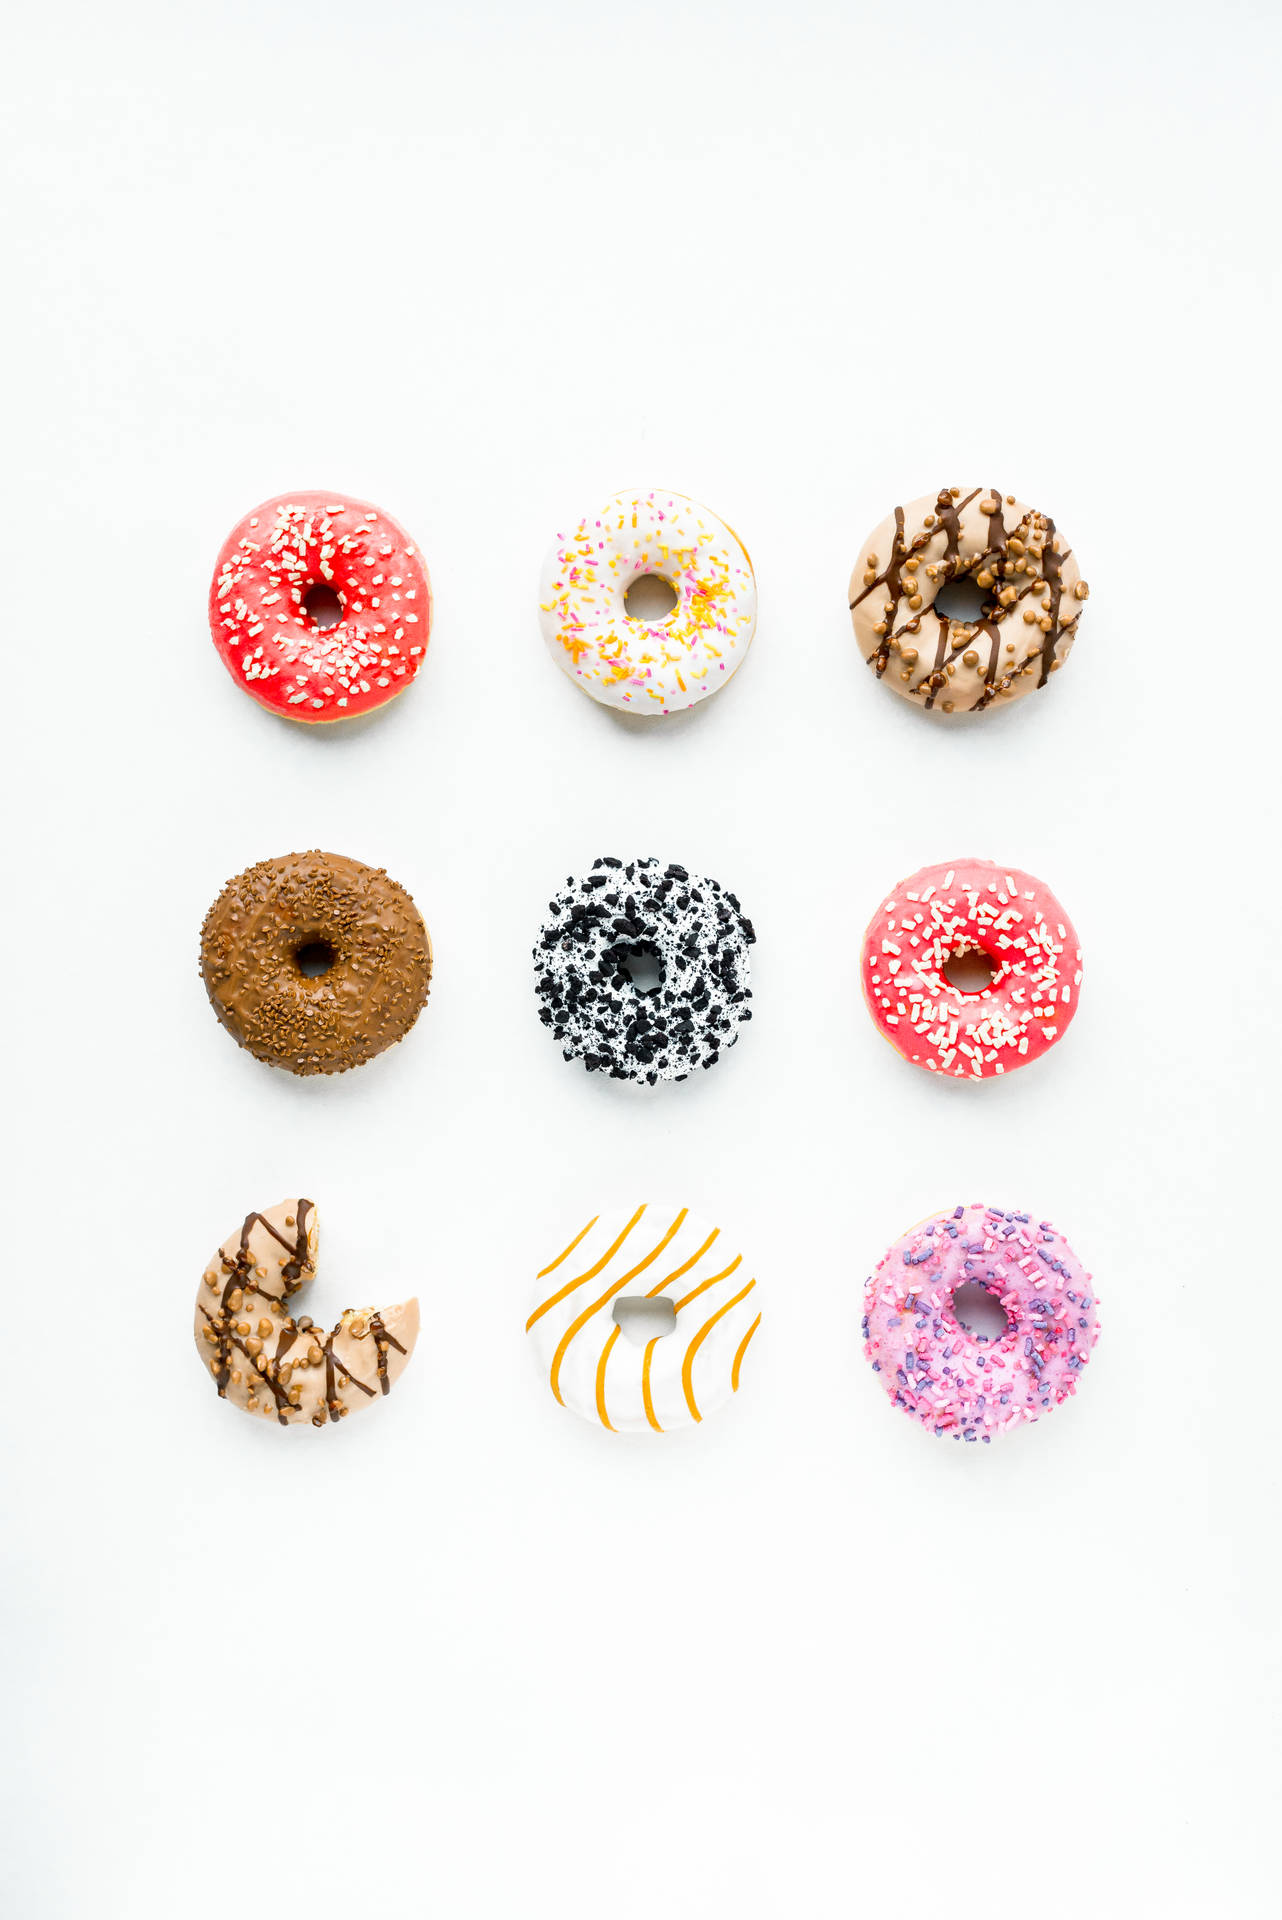 Assorted Doughnuts Pastry Background